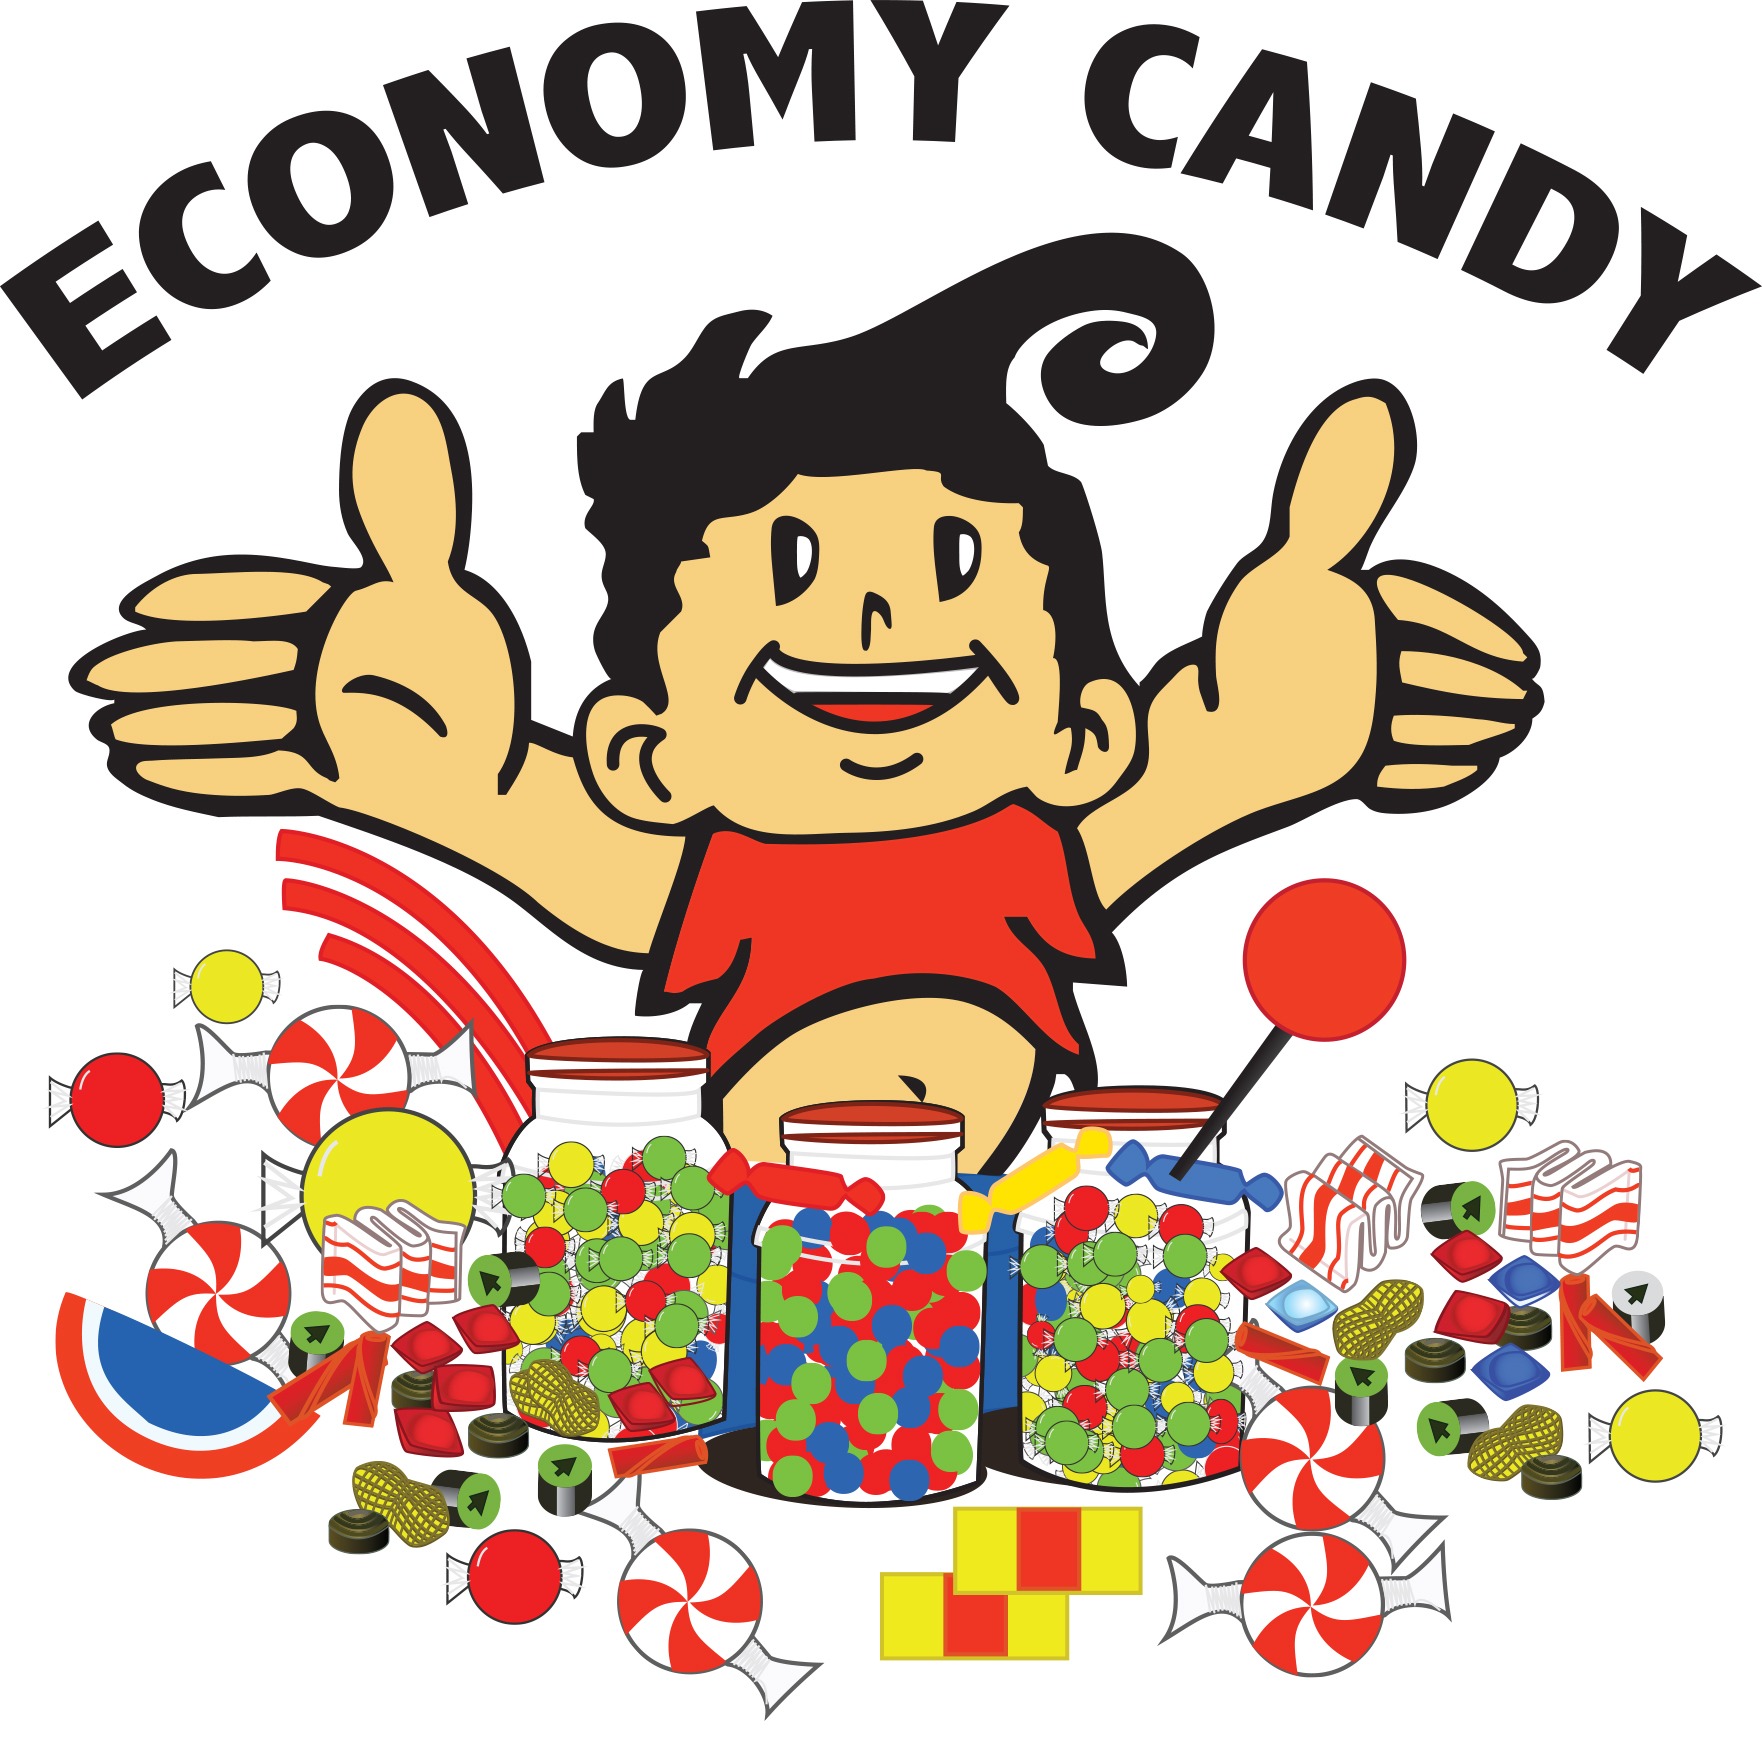 ECONOMY CANDY FOR PETS